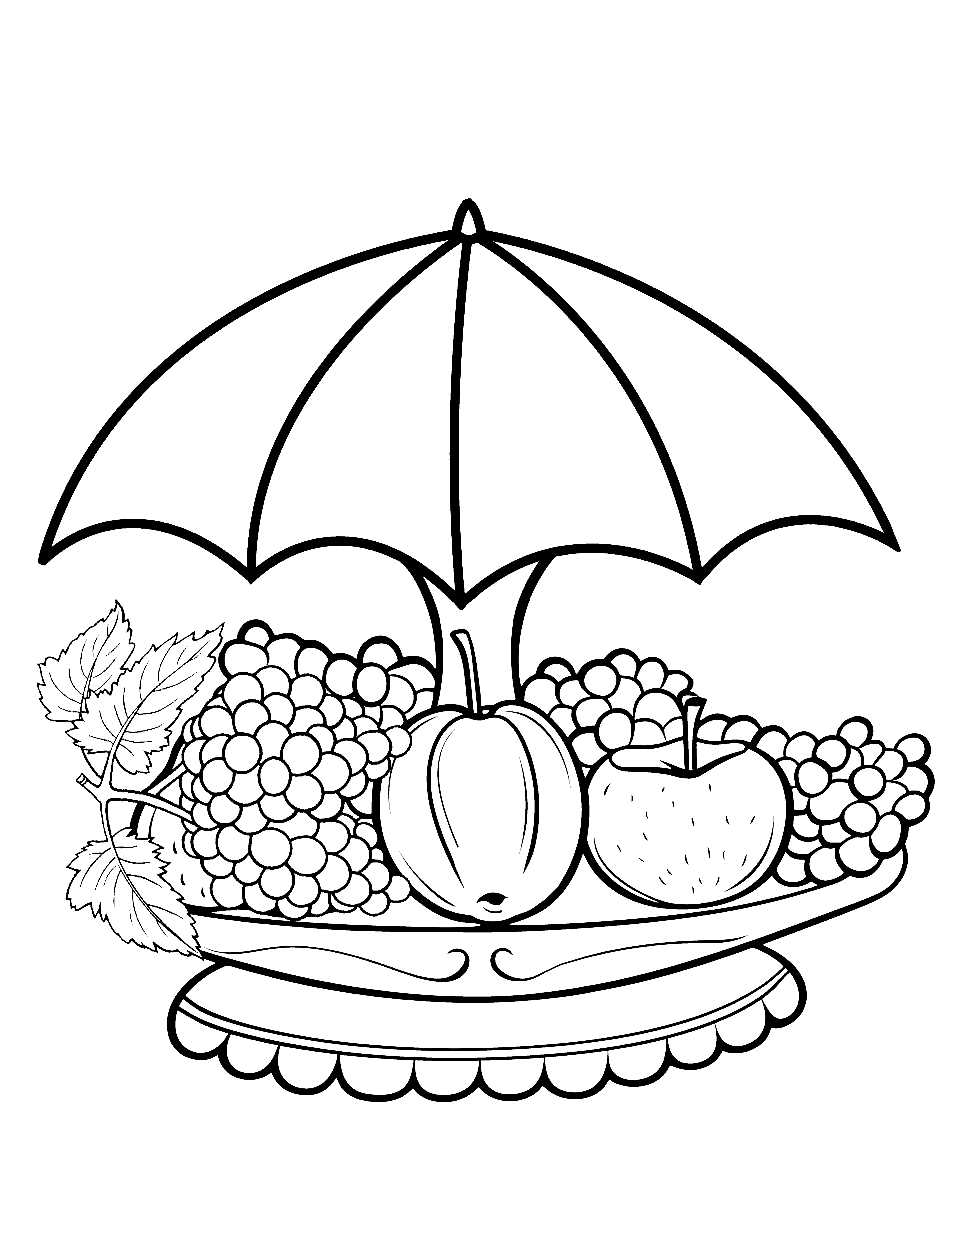 Fruit Merry-Go-Round Bowl Coloring Page - A merry-go-round shaped bowl with fruits.